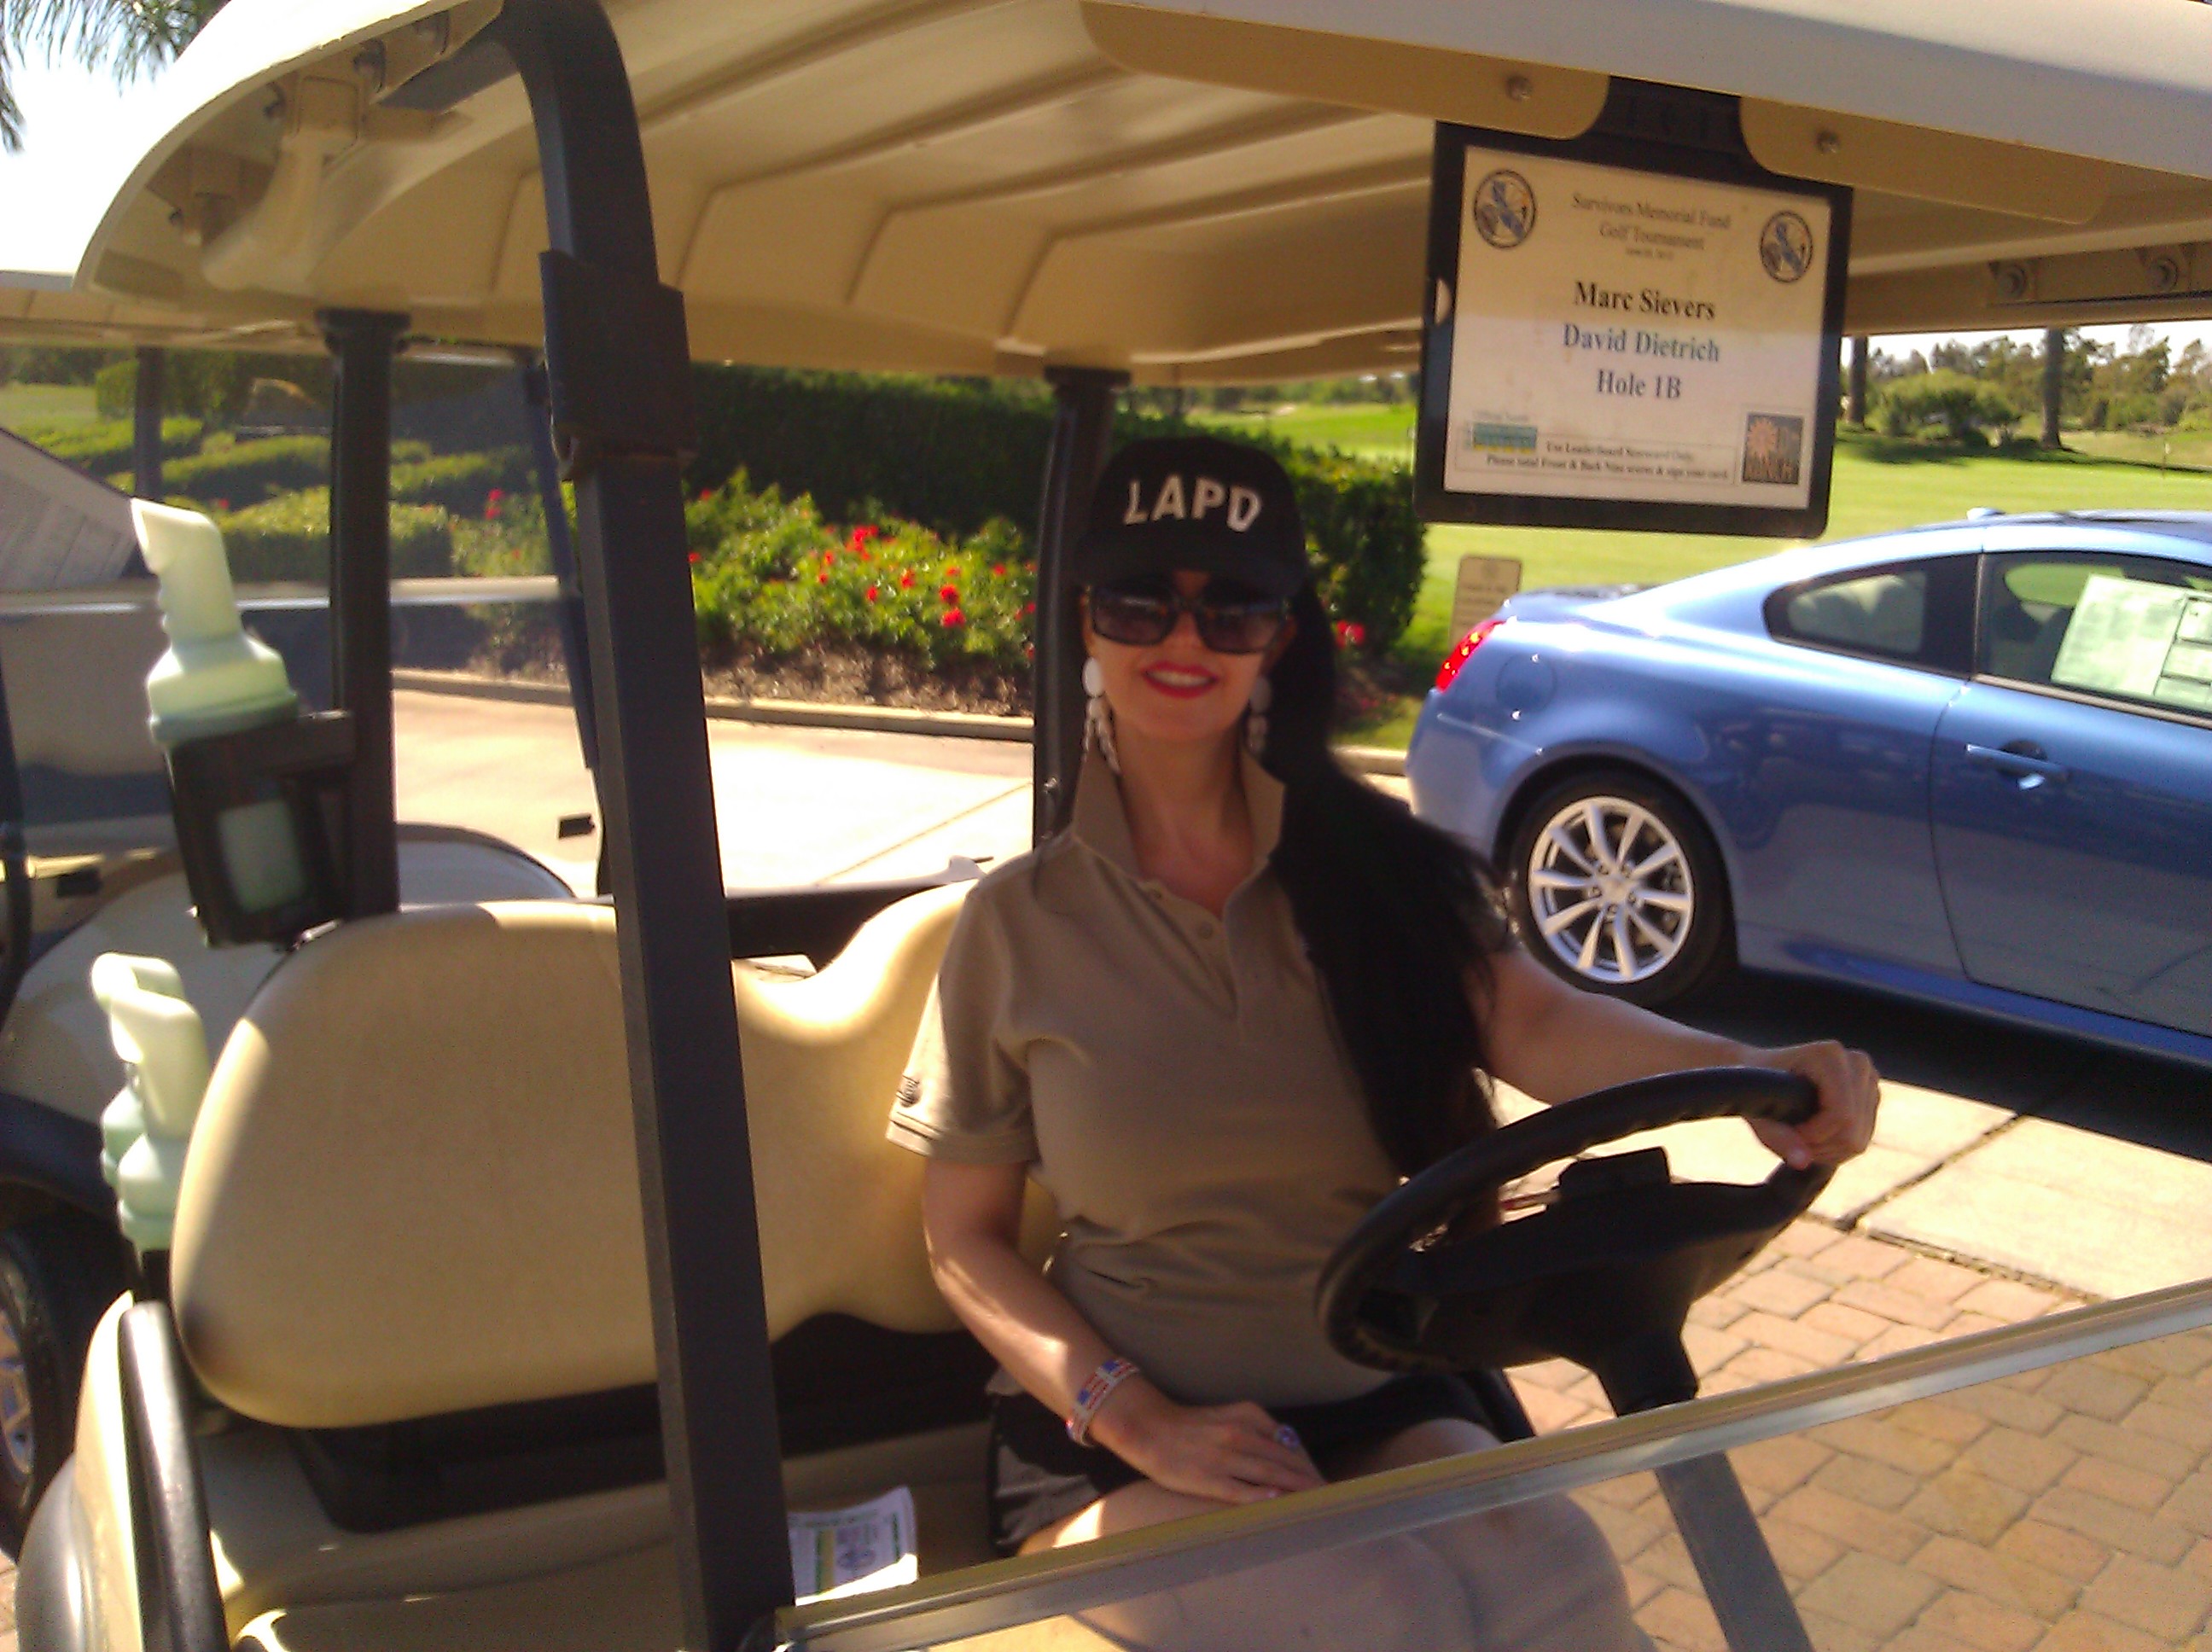 Actress Alexis Kiley at the 2012 California Narcotic Officer's Association Survivor's Memorial Fund- Golf Tournament at the Old Ranch Country Club in Seal Beach. Alexis Kiley is a committee member for the Survivor Memorial Fund for fallen offic